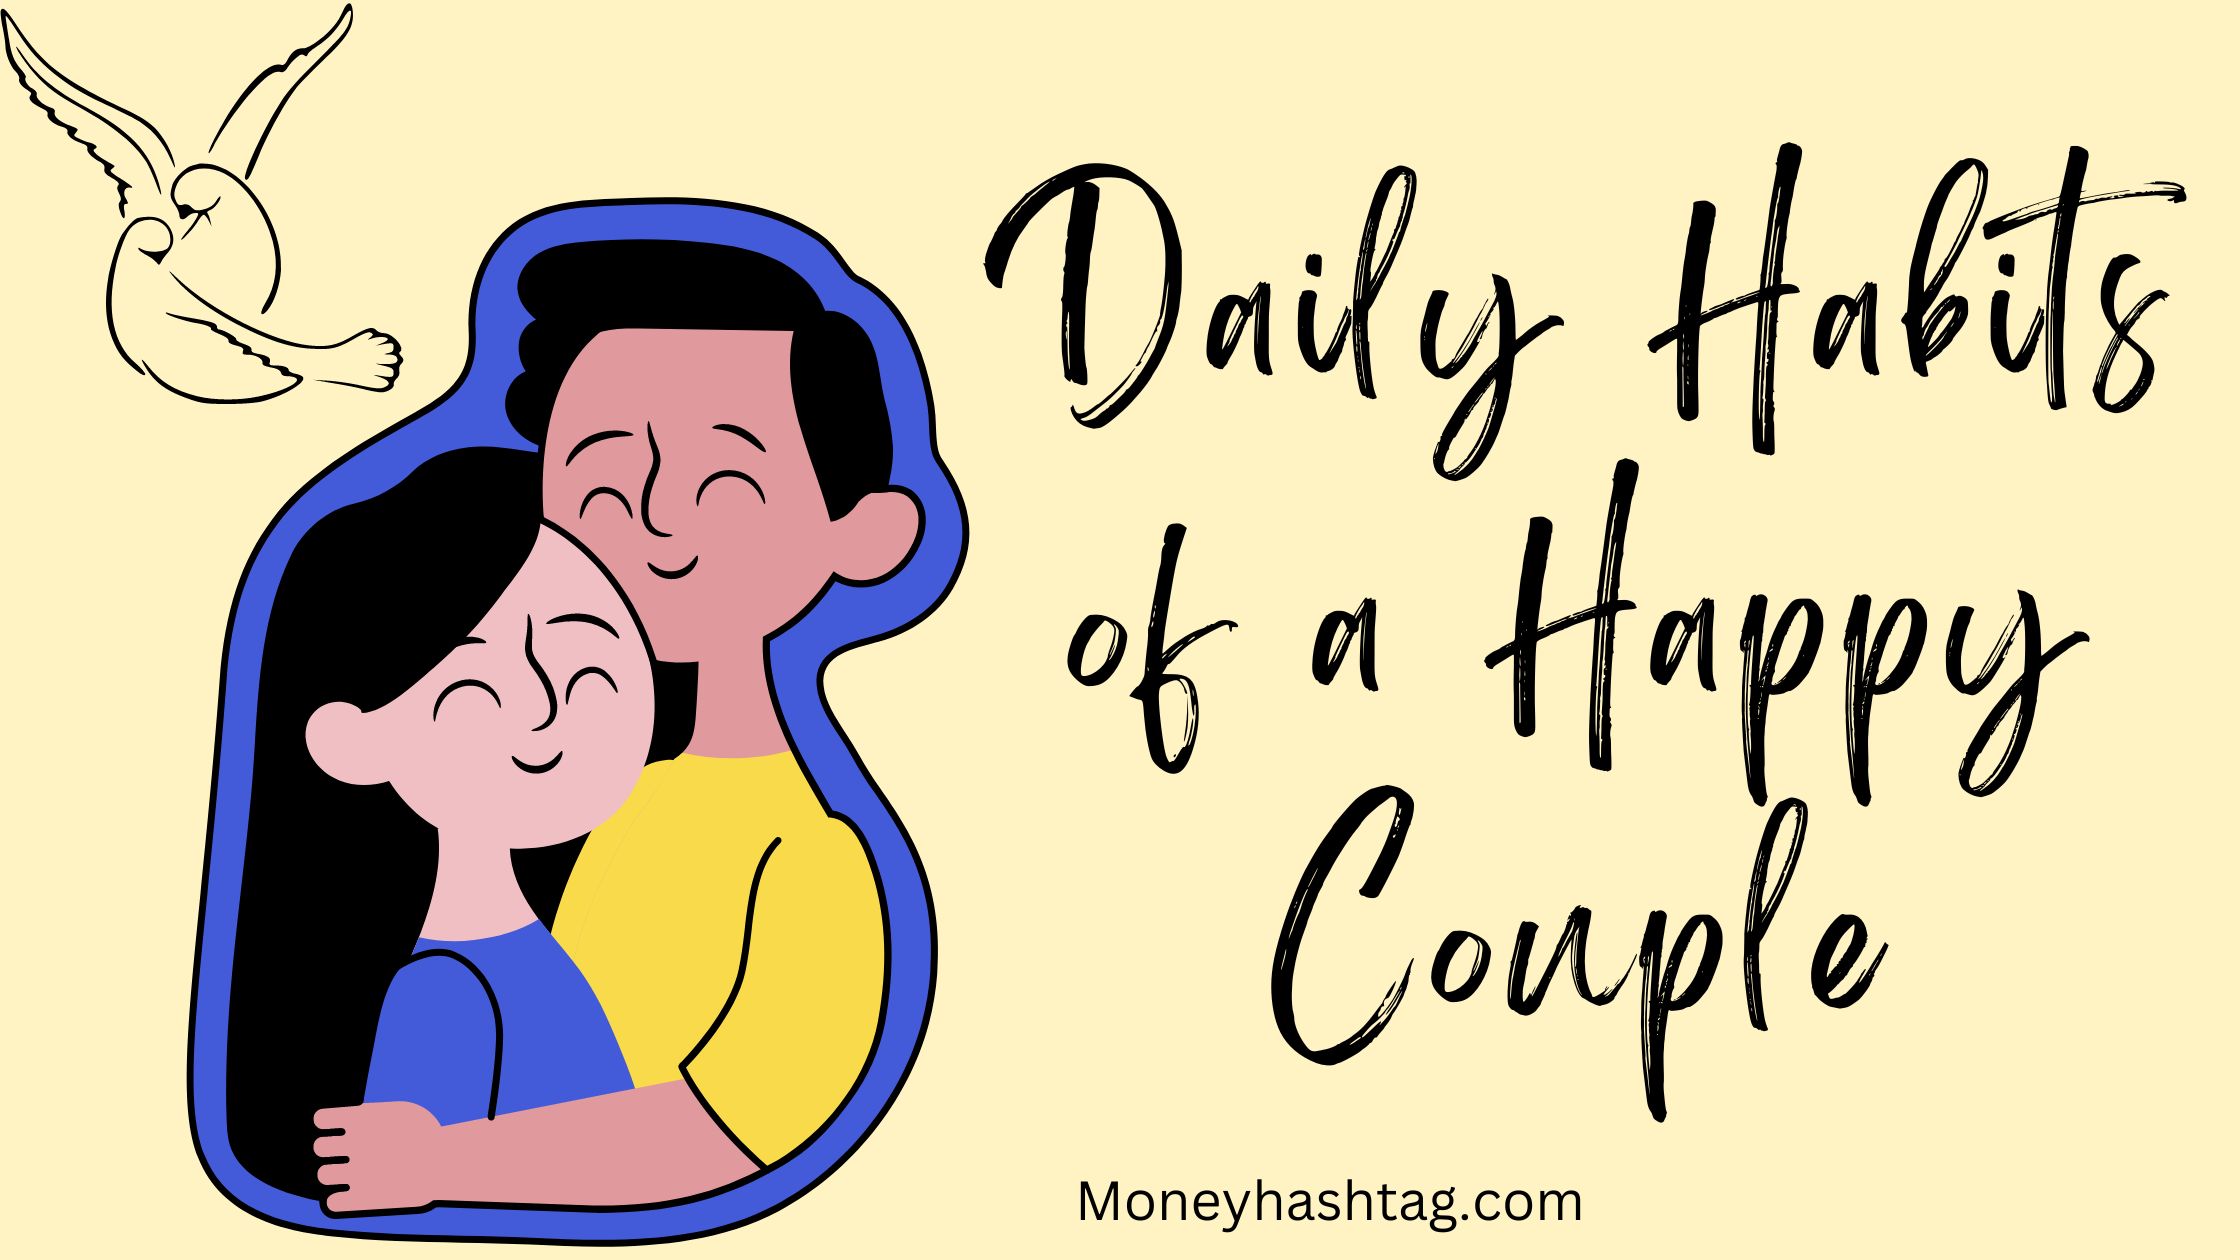 21 Daily Habits of a Happy Couple: How to be happier every day 14